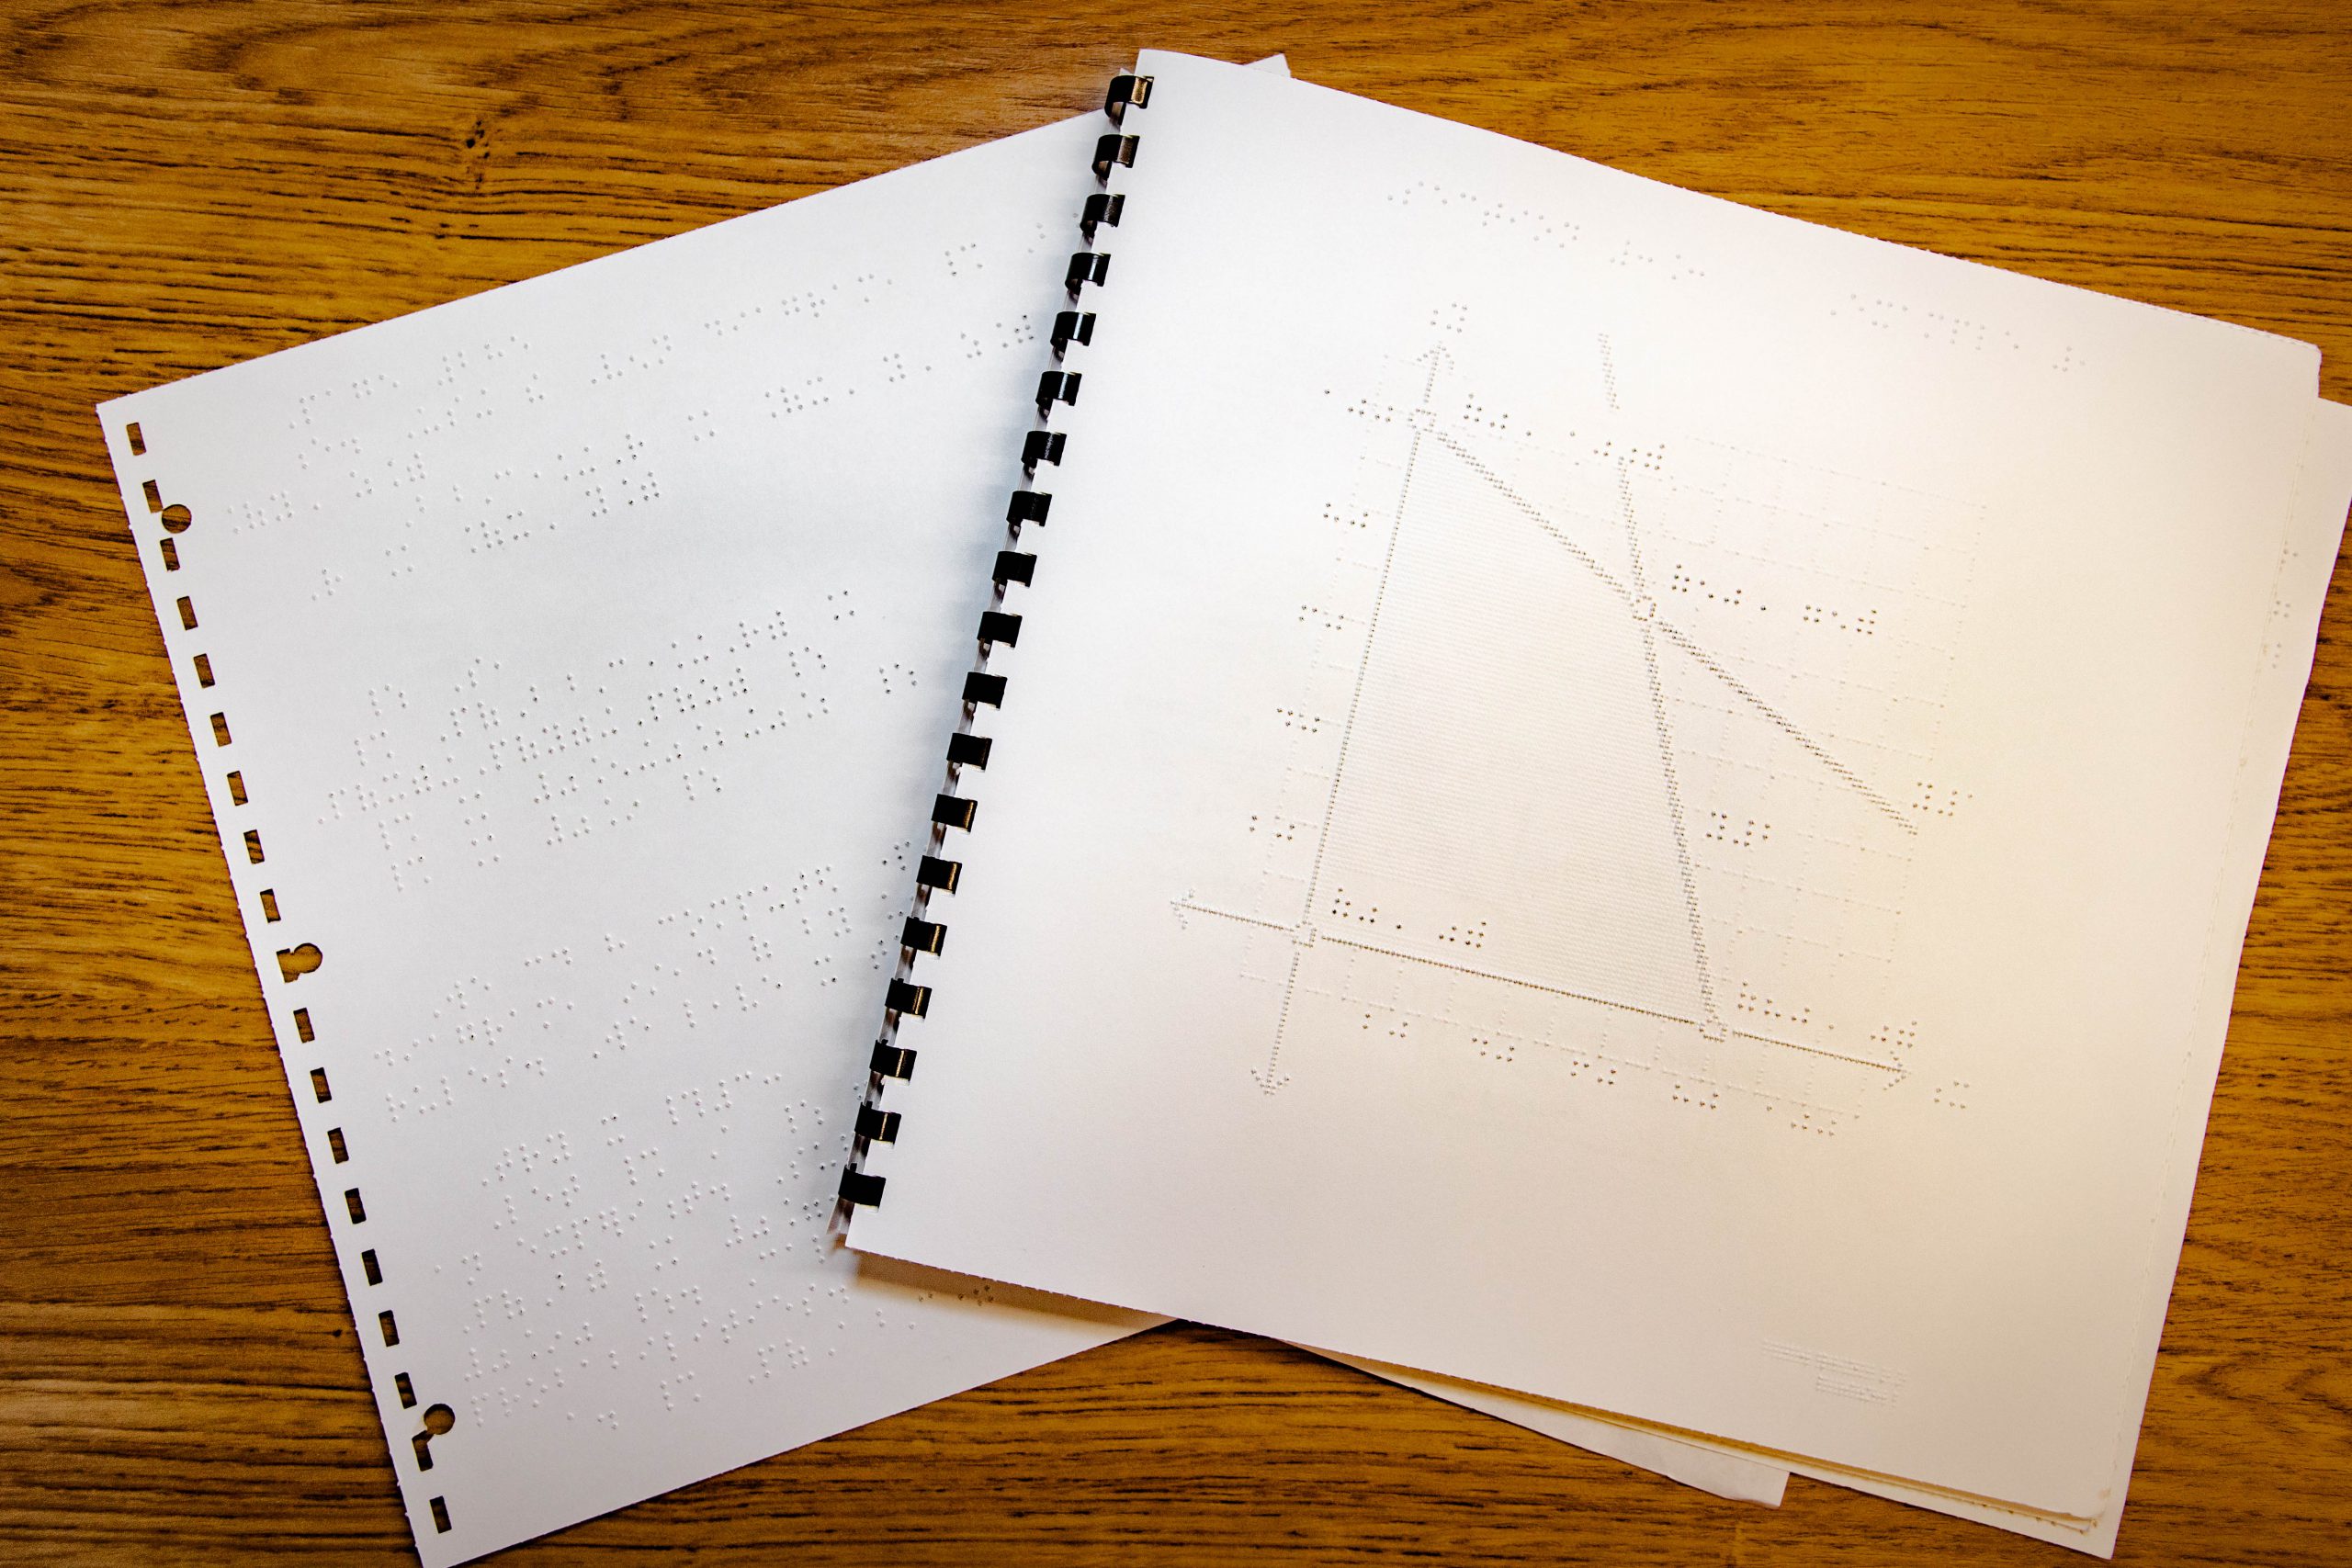 printed notebooks showcasing a math equation translated into braille